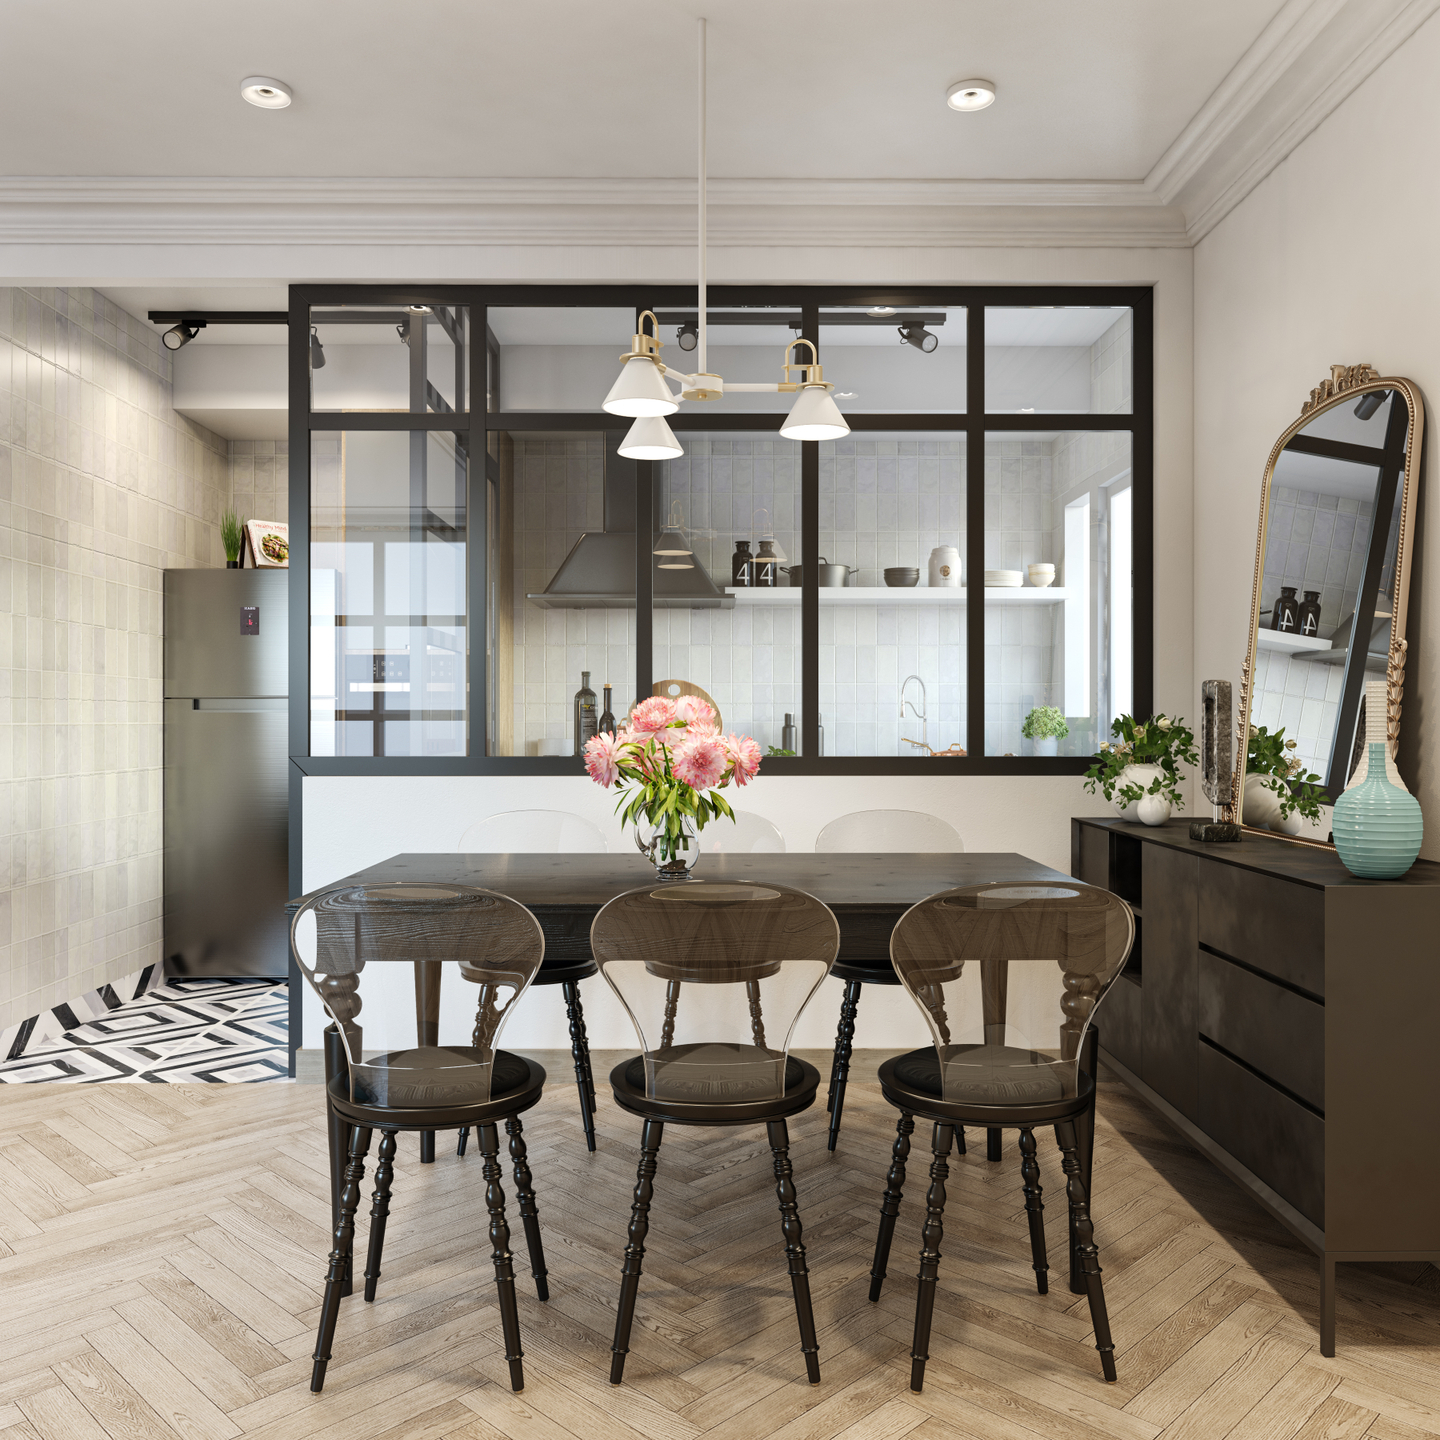 Compact & Elegant Dining Room With Industrial Elements - Livspace